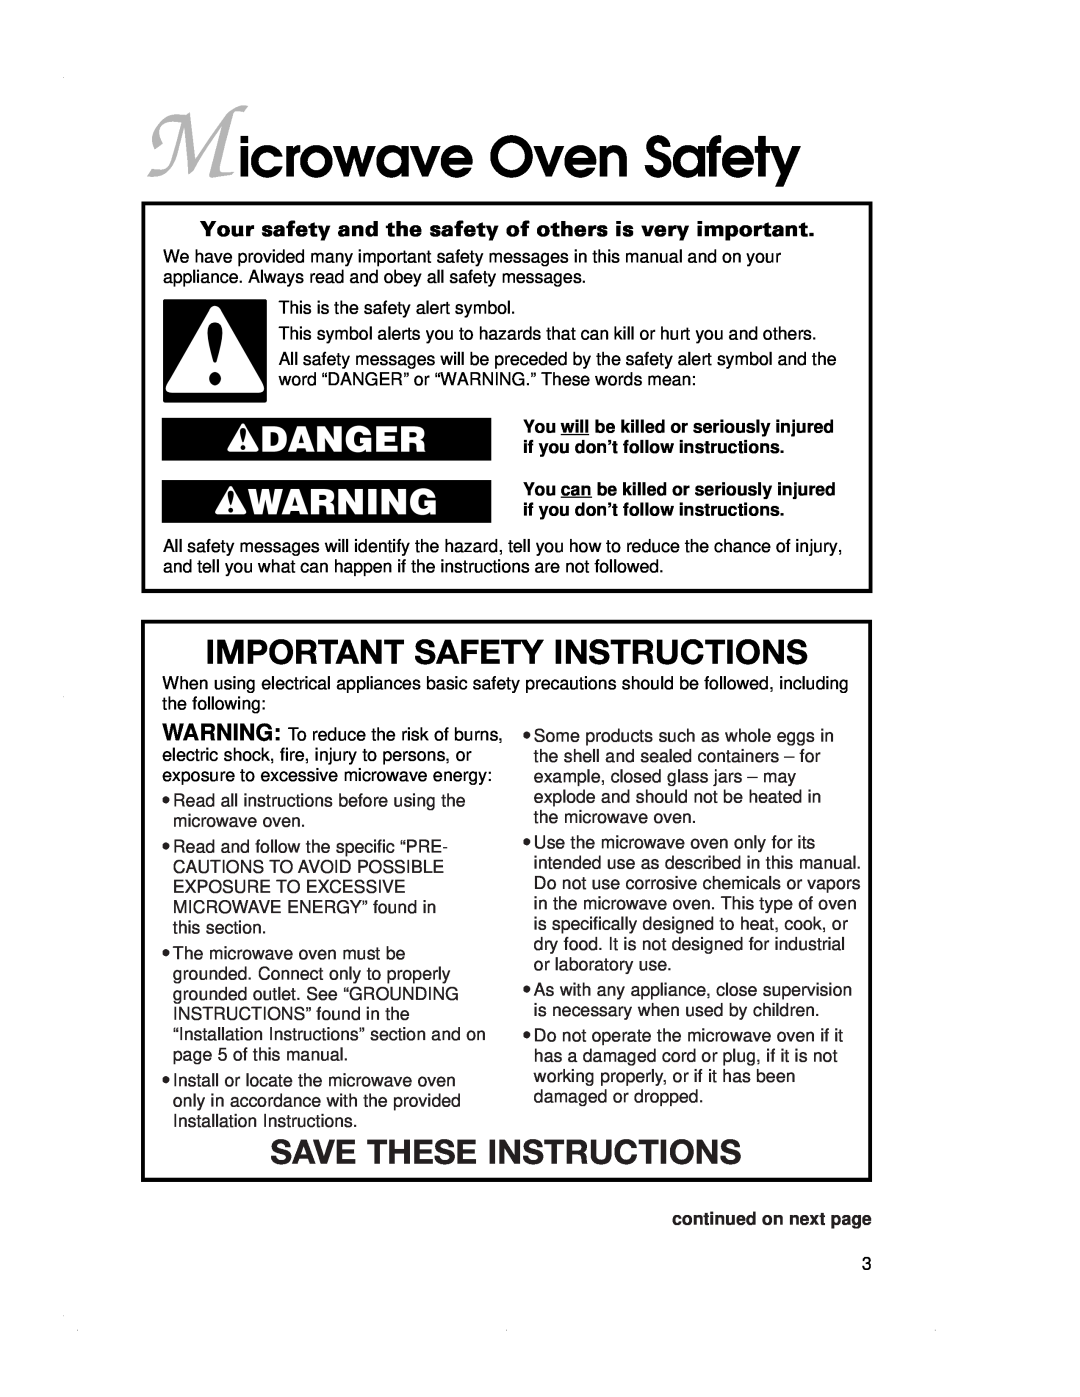 KitchenAid KEMS377G Microwave Oven Safety, Important Safety Instructions, Save These Instructions, wDANGER wWARNING 